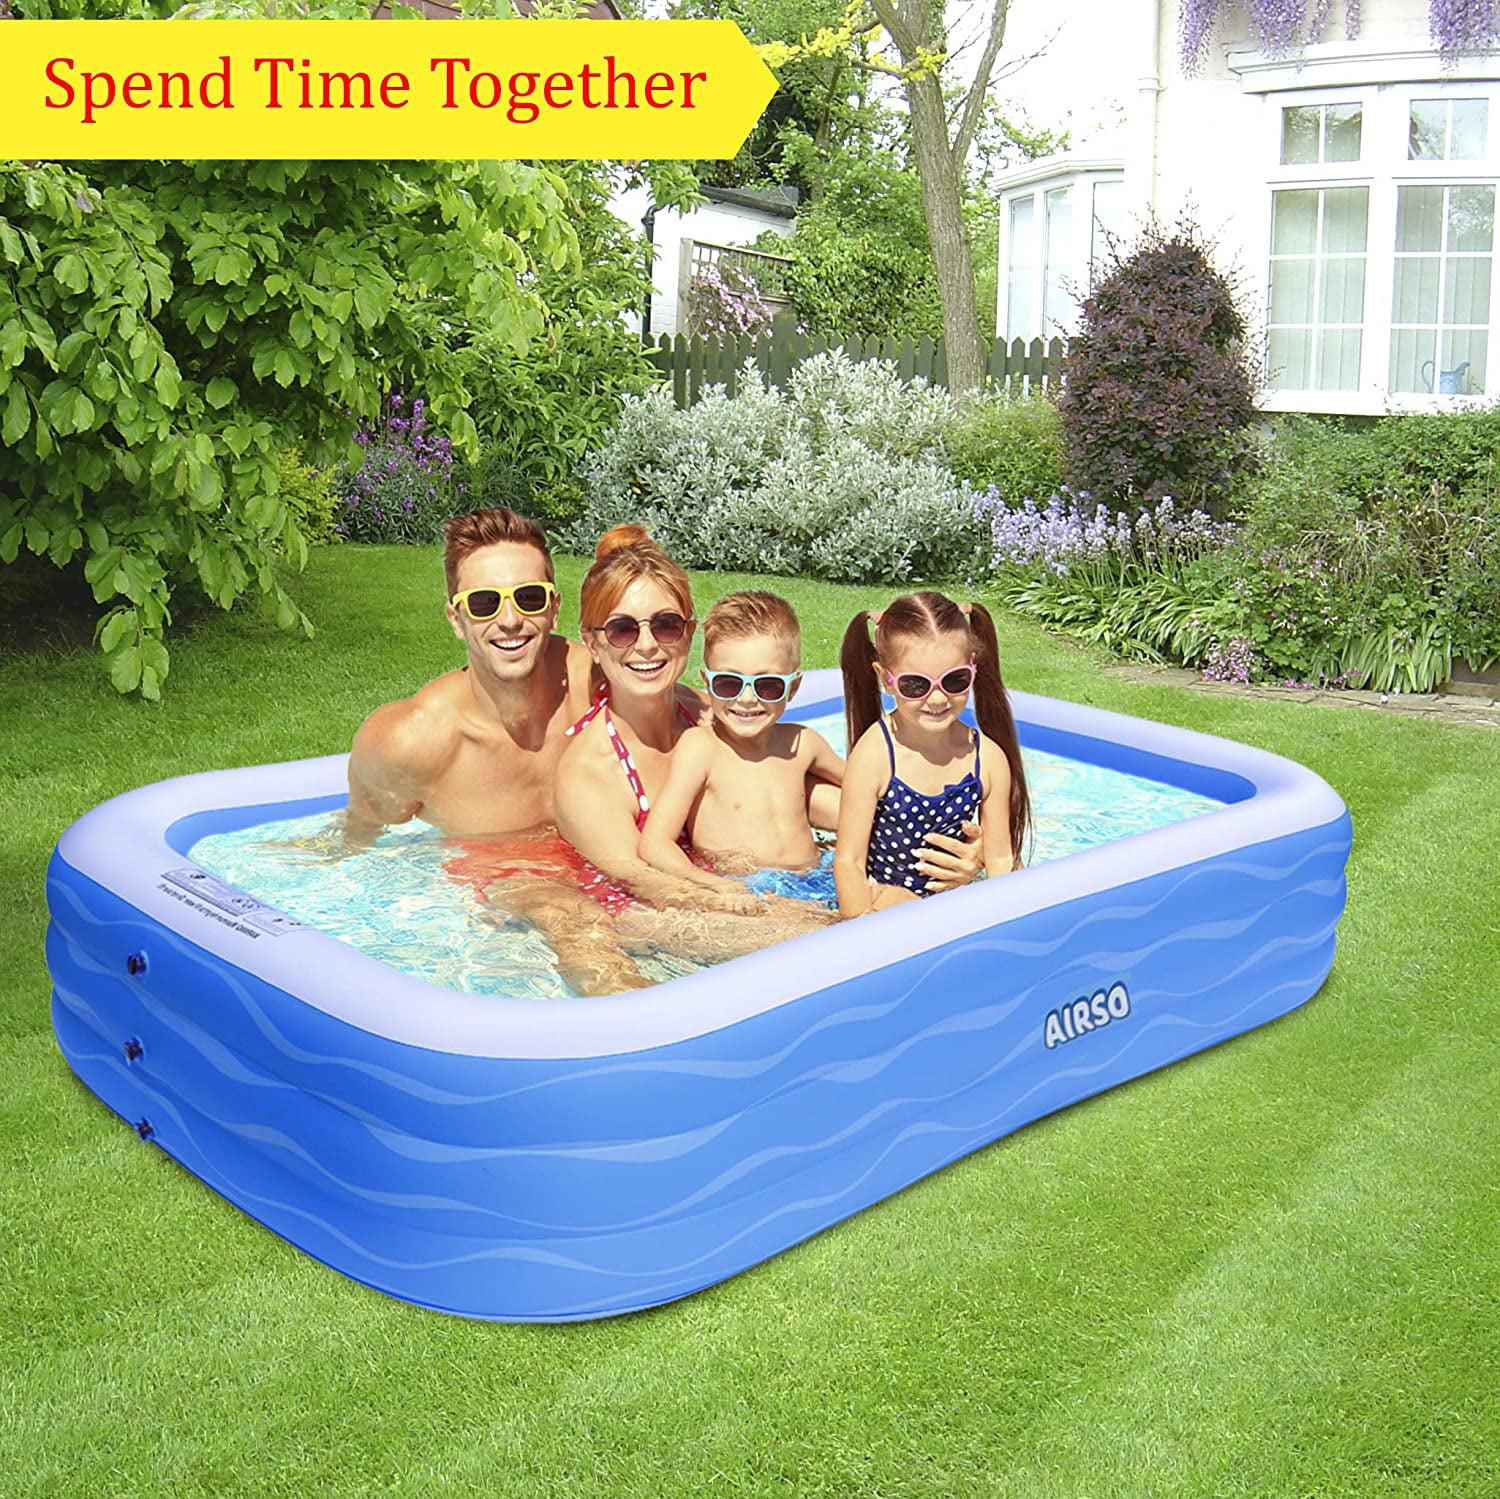 SP-BP001 118 inch X 72.5 inch X 20 inch Rectangle Above Ground Family Blow Up Pool for Kiddie Adults Inflatable Swimming Pool Large Full-Sized Thickened Plastic Pool for Garden Backyard Outdoor 